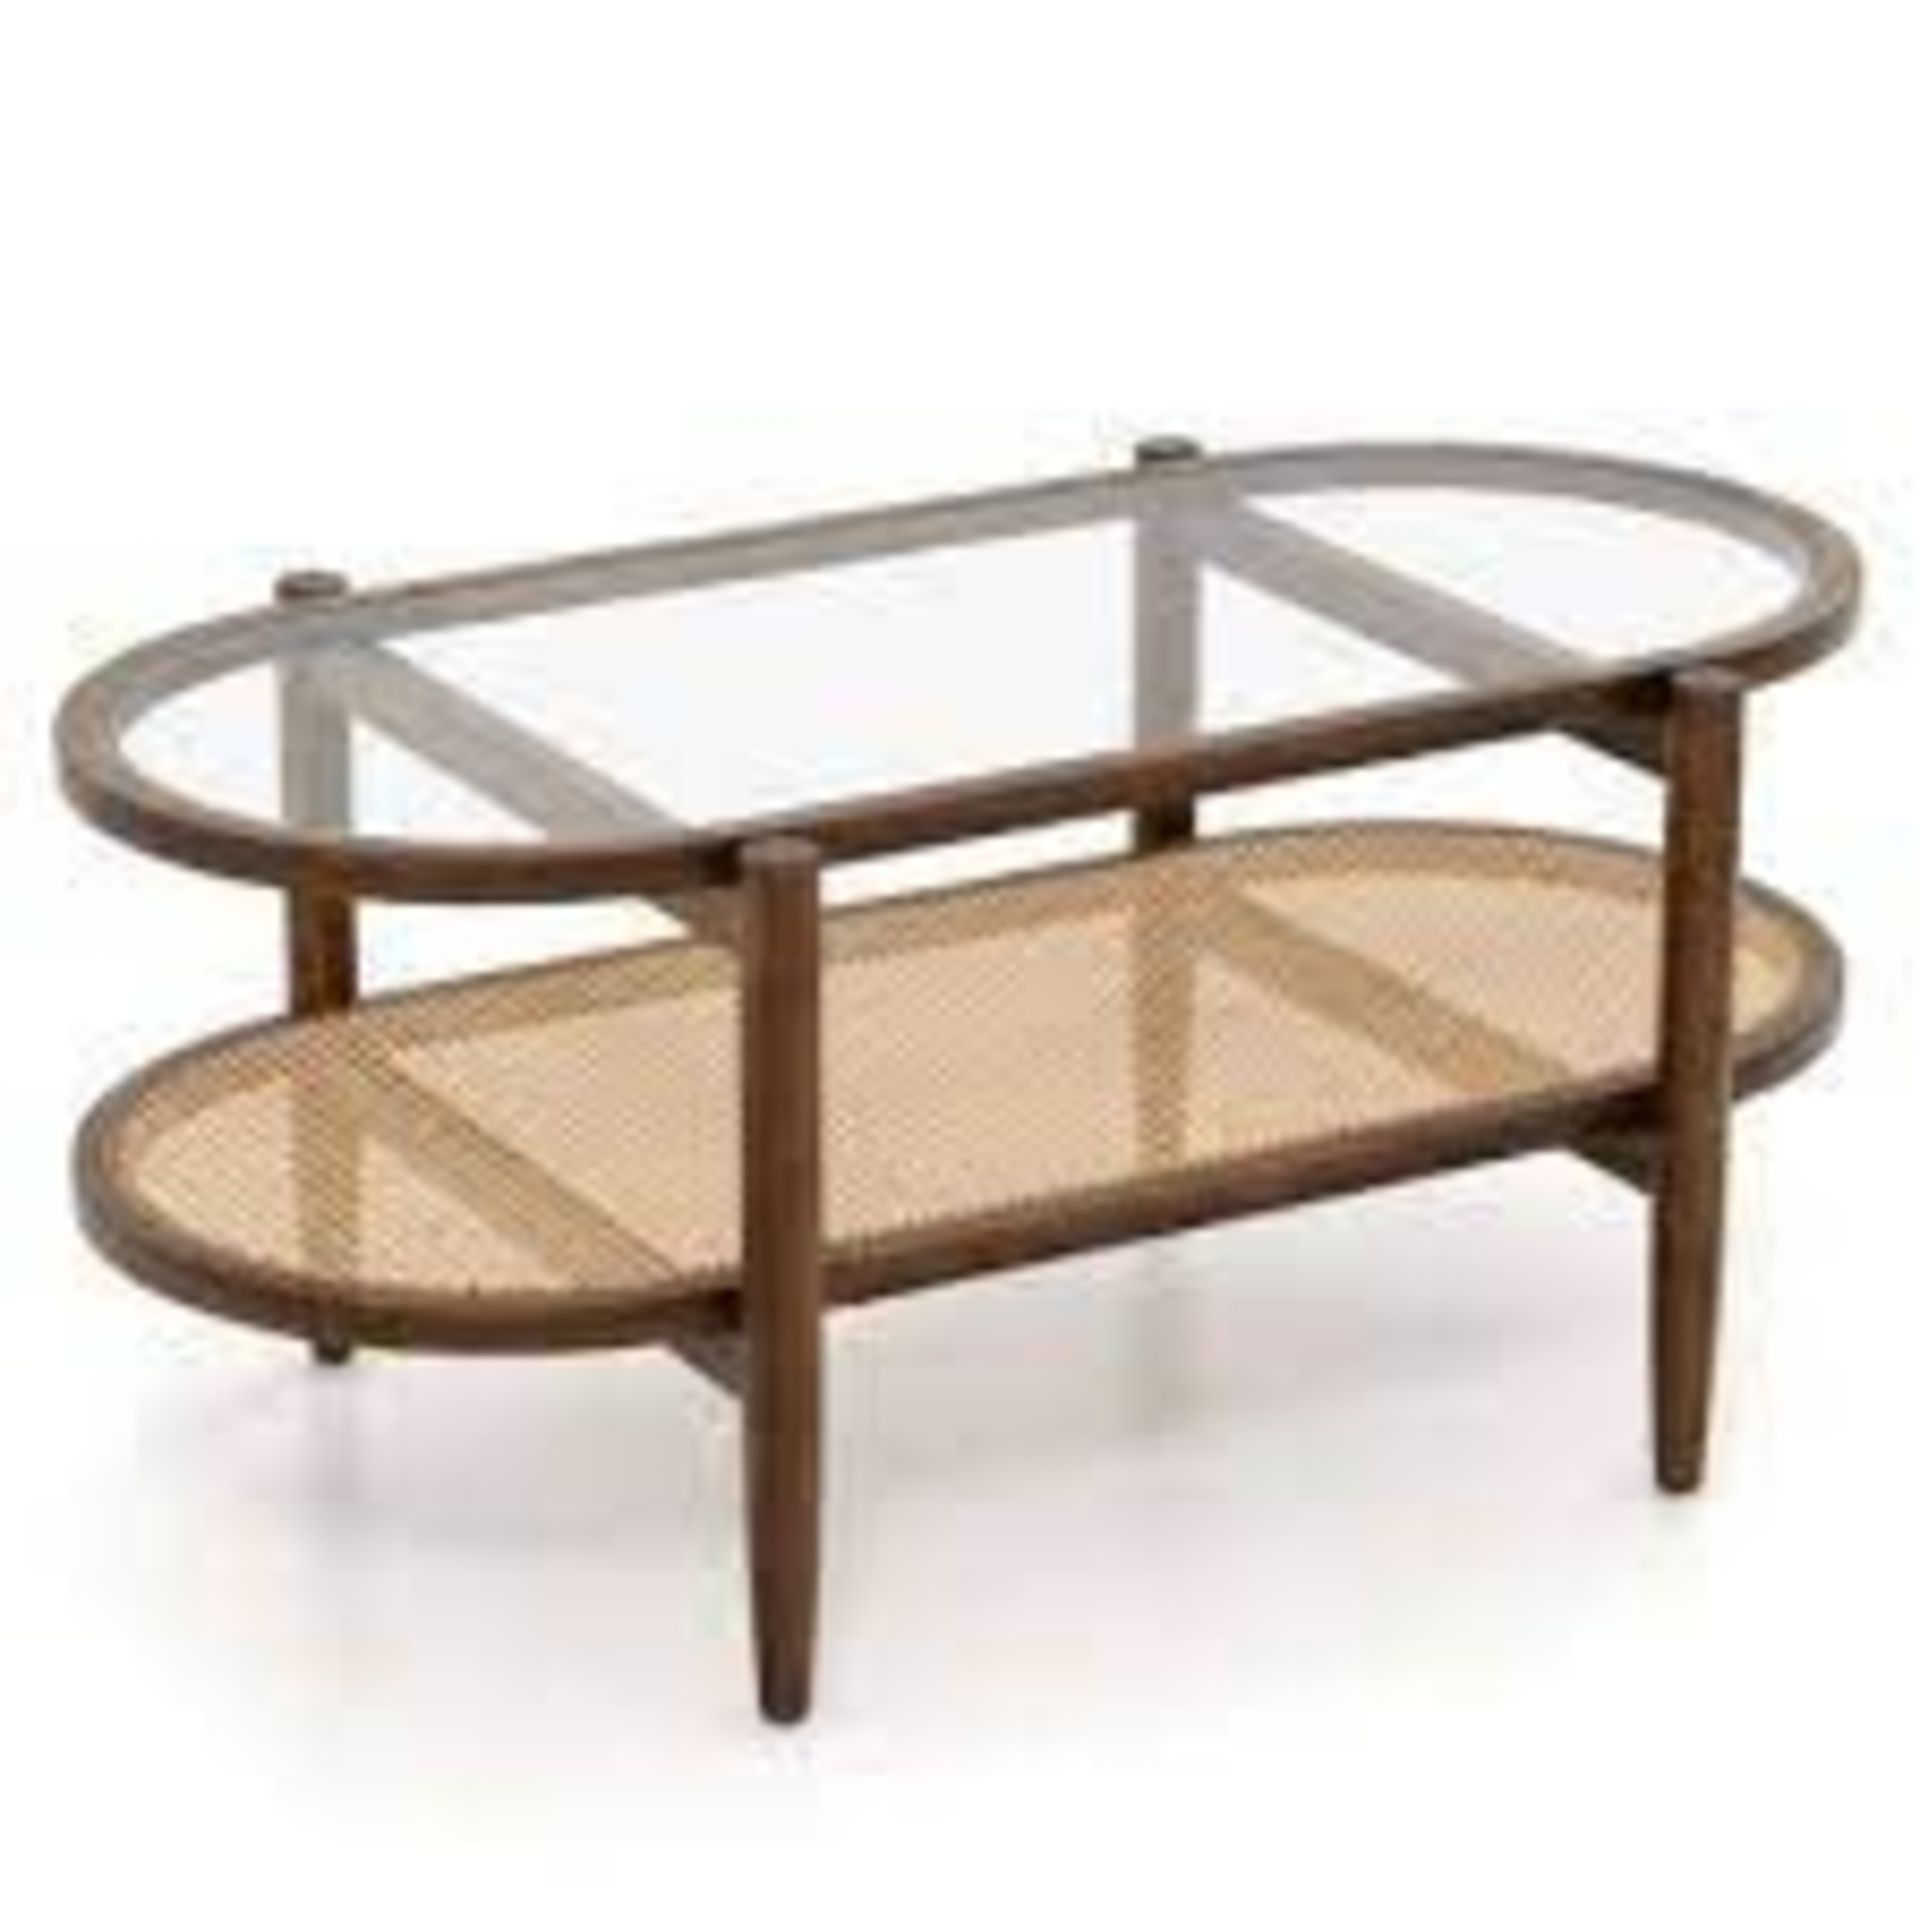 2-Tier PE Rattan Coffee Table with Storage. - R14.6. Introducing the incredibly versatile and